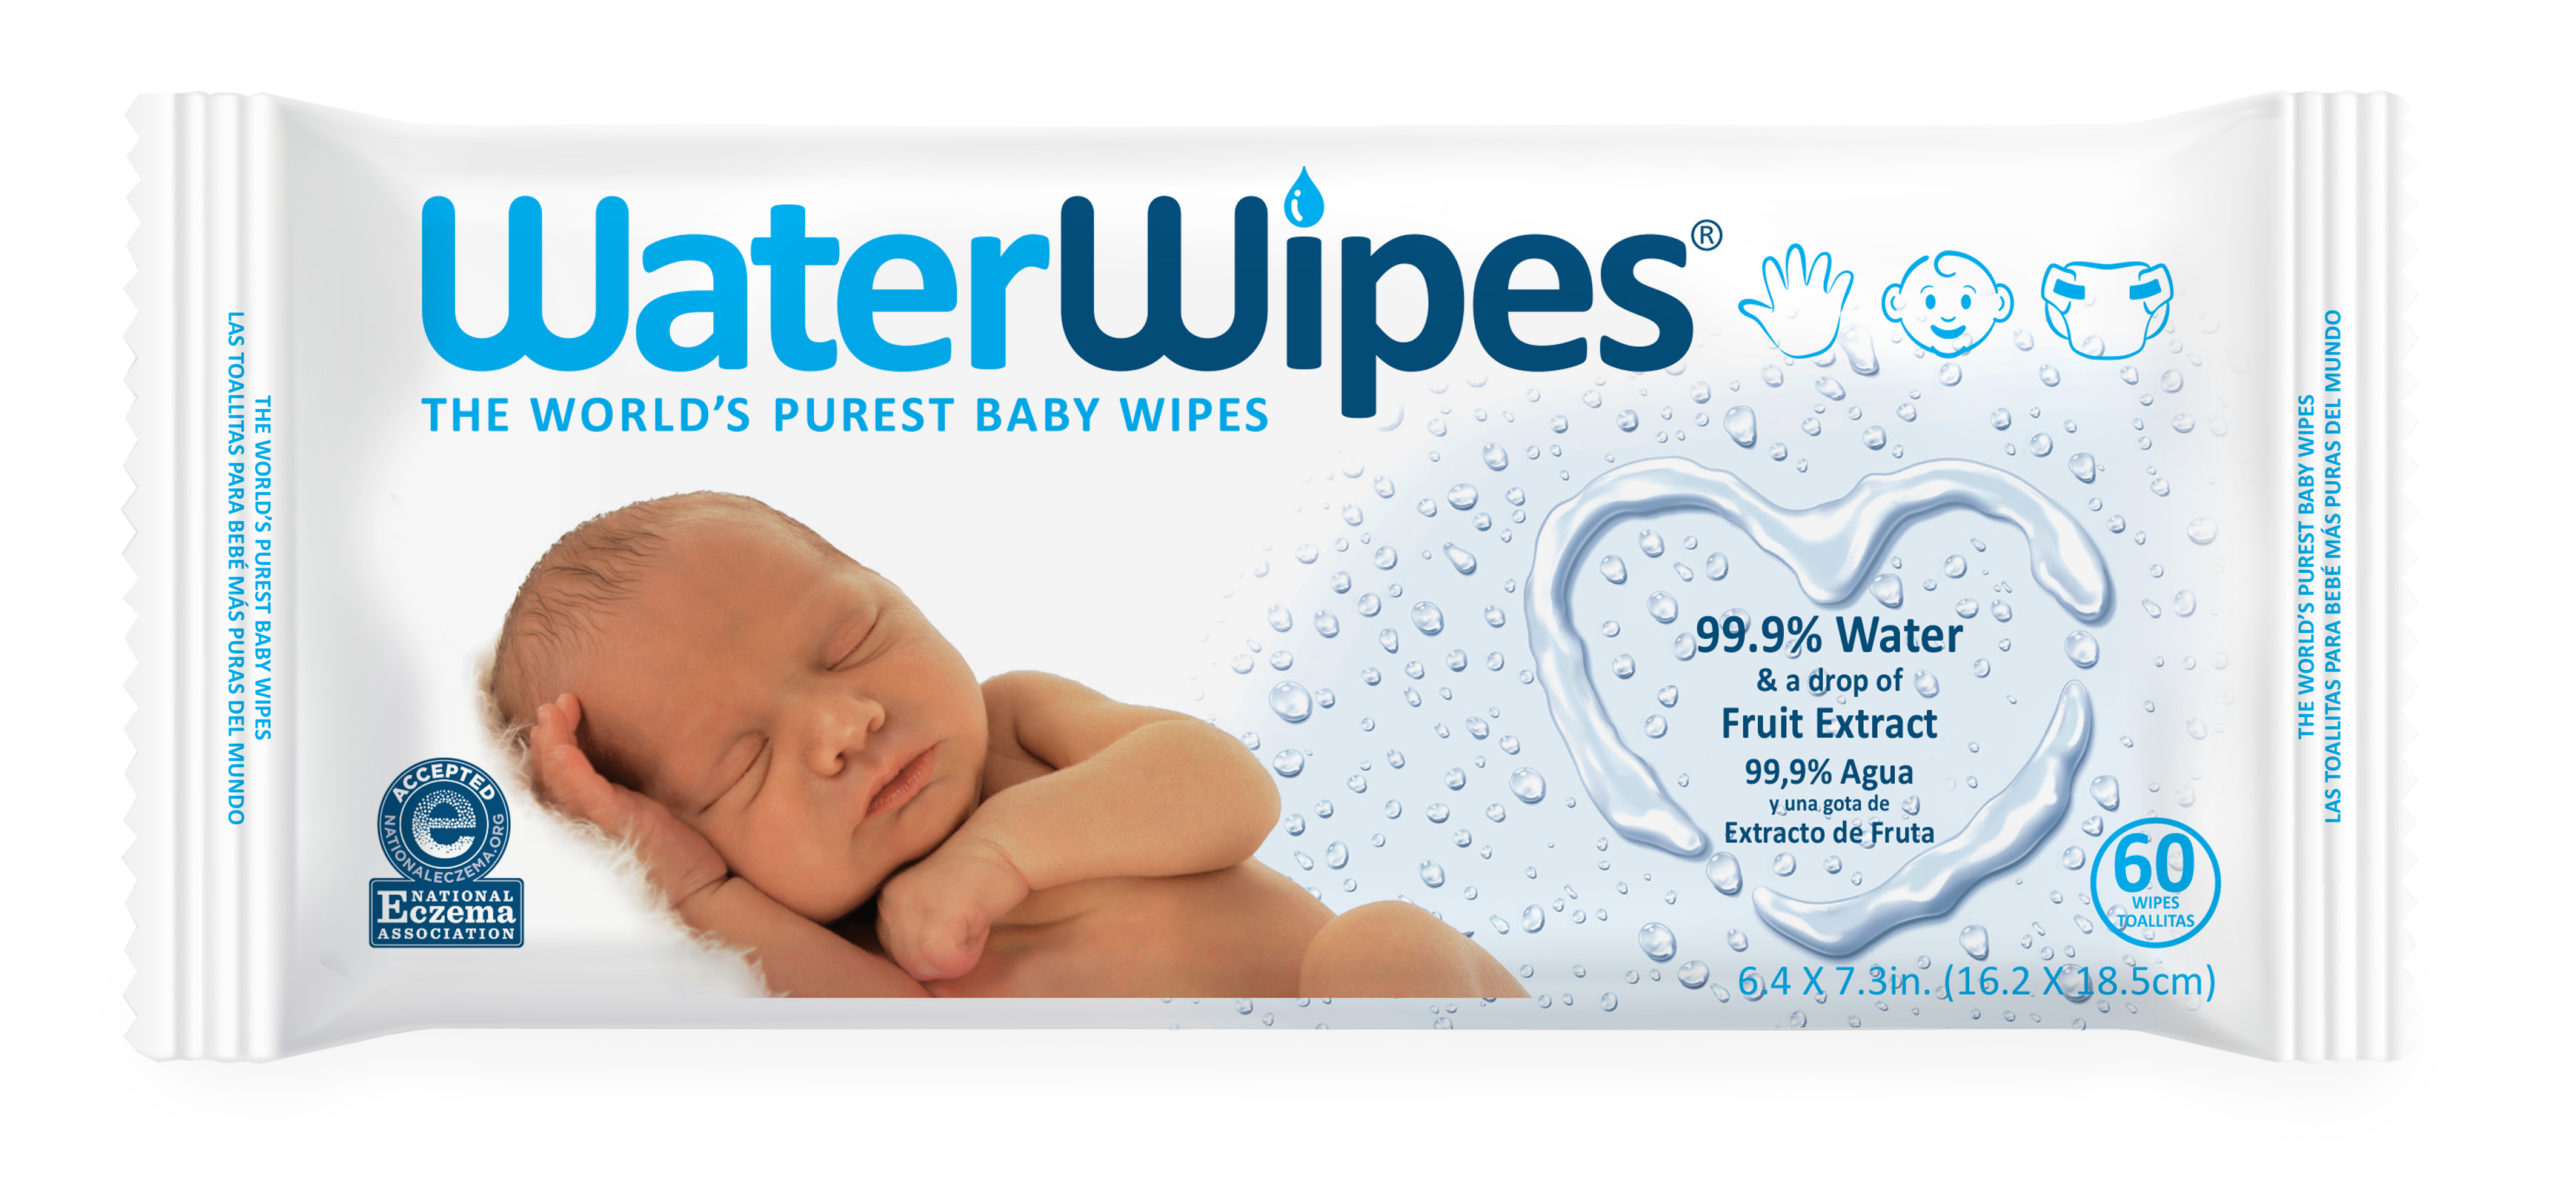 12 Packs 1 Pack WaterWipes Unscented Baby Wipes Sensitive and Newborn Skin 720 Wipes and Waterwipes Unscented Nose to Toes XL Bathing Wipes 16 Wipes 